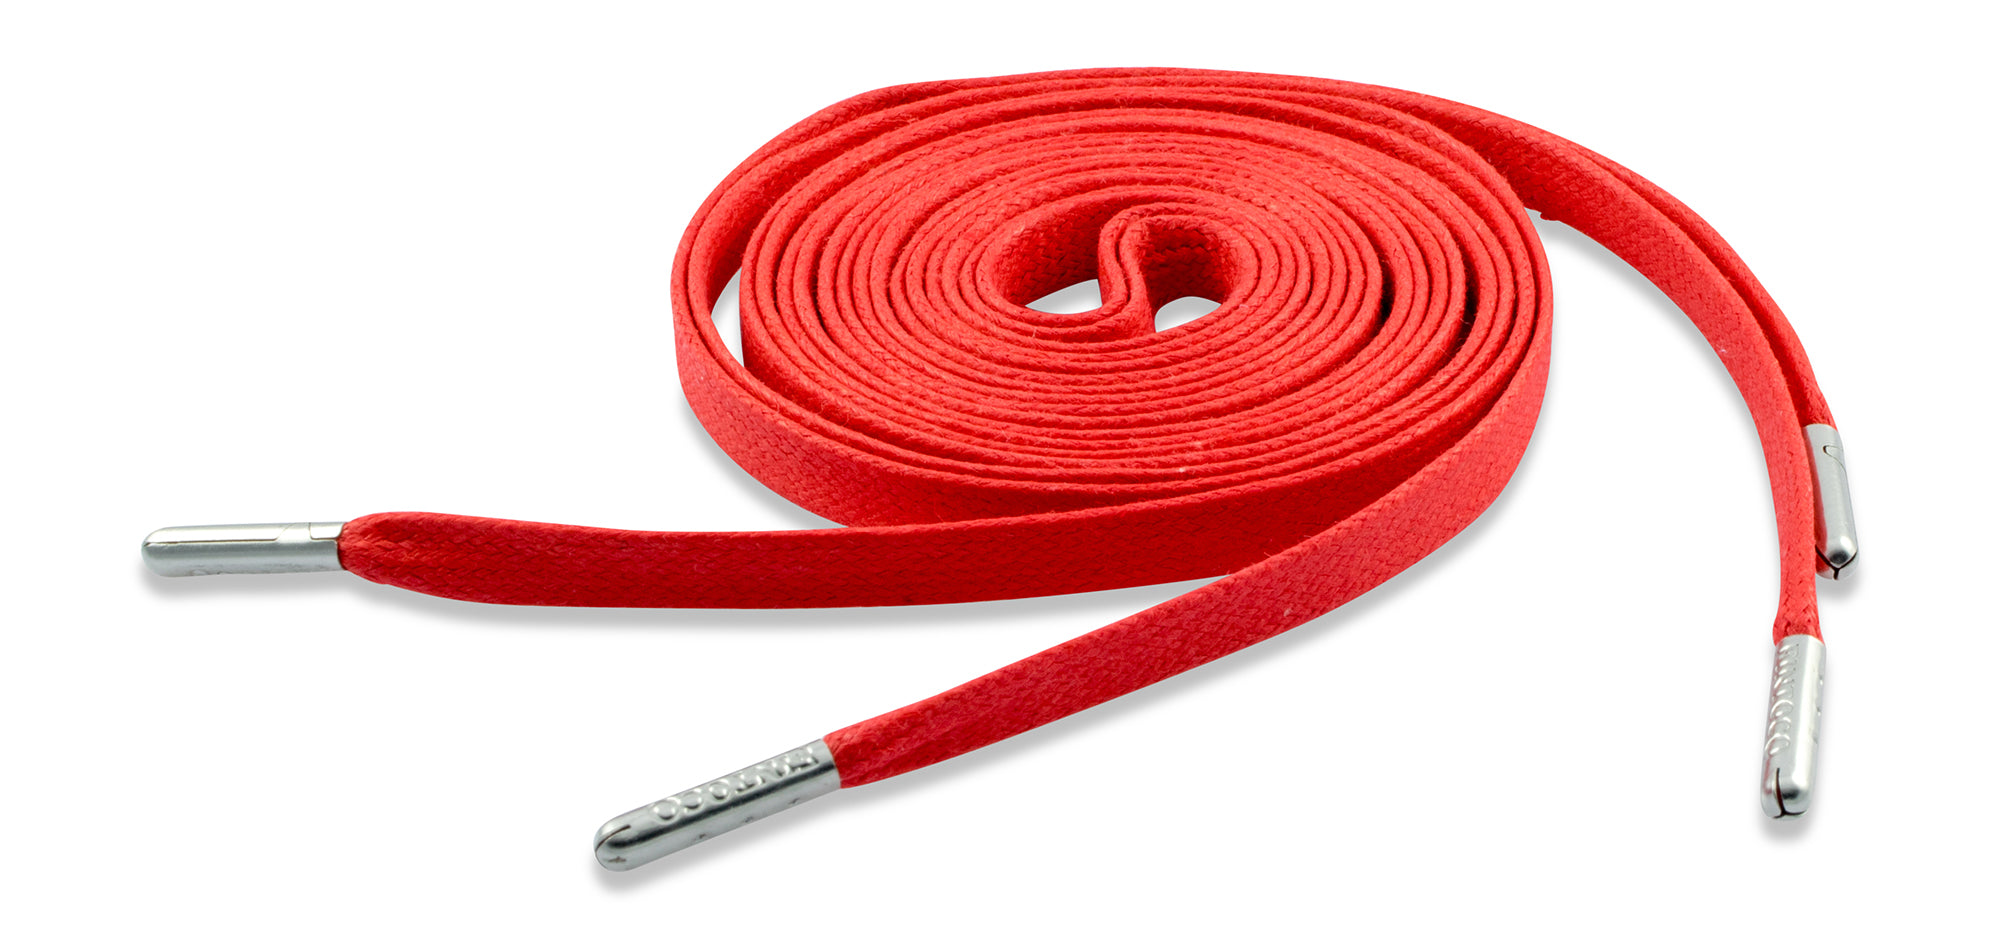 Flat Waxed Athletic Shoelaces - Red with Silver Tips